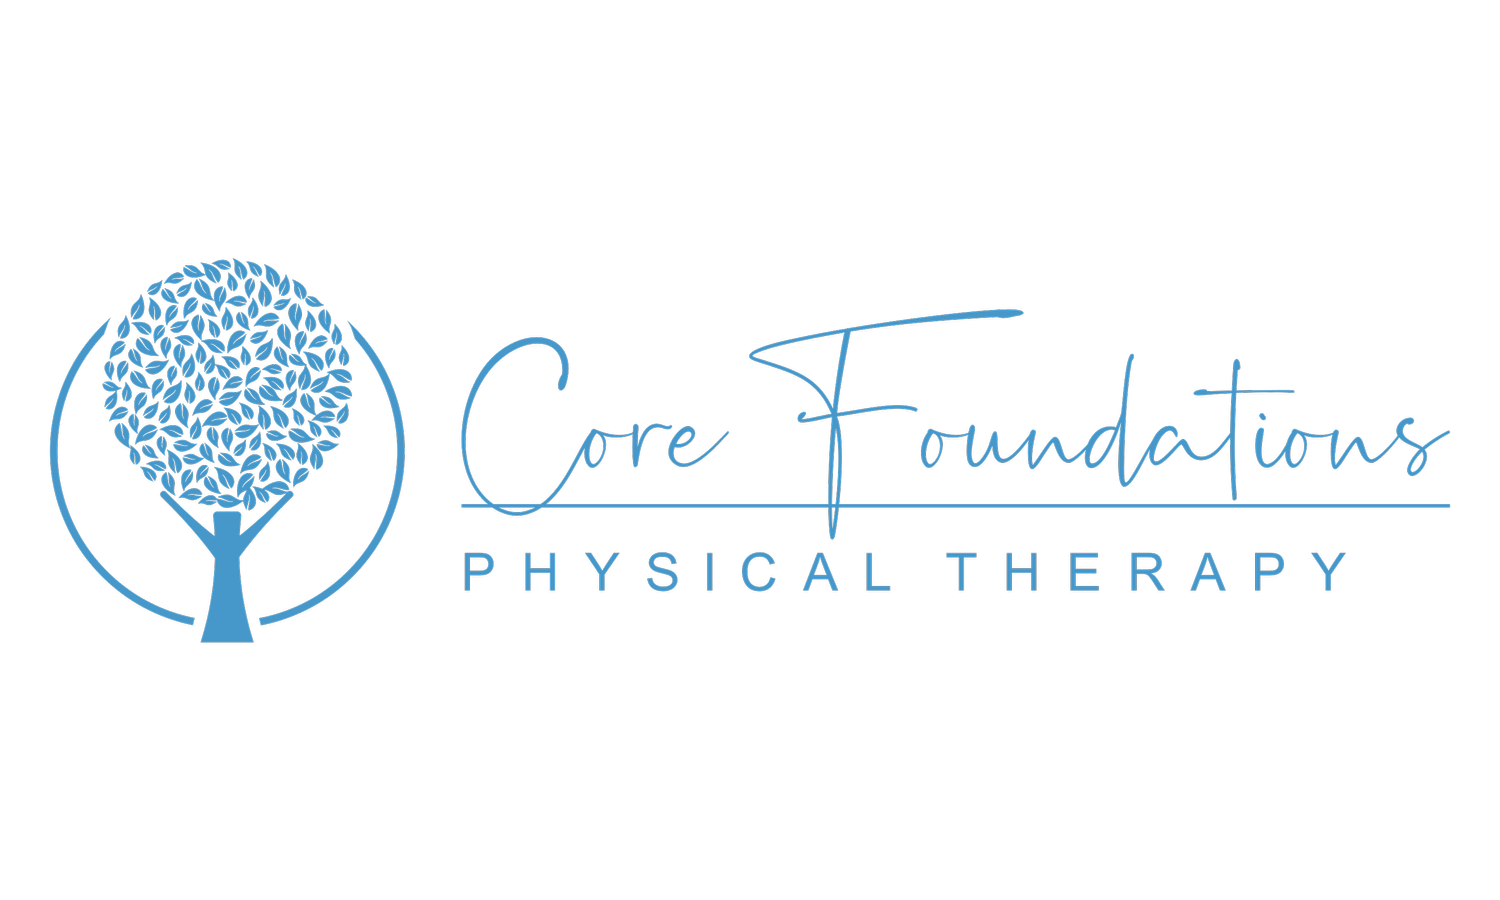 Core Foundations Pelvic Physical Therapy